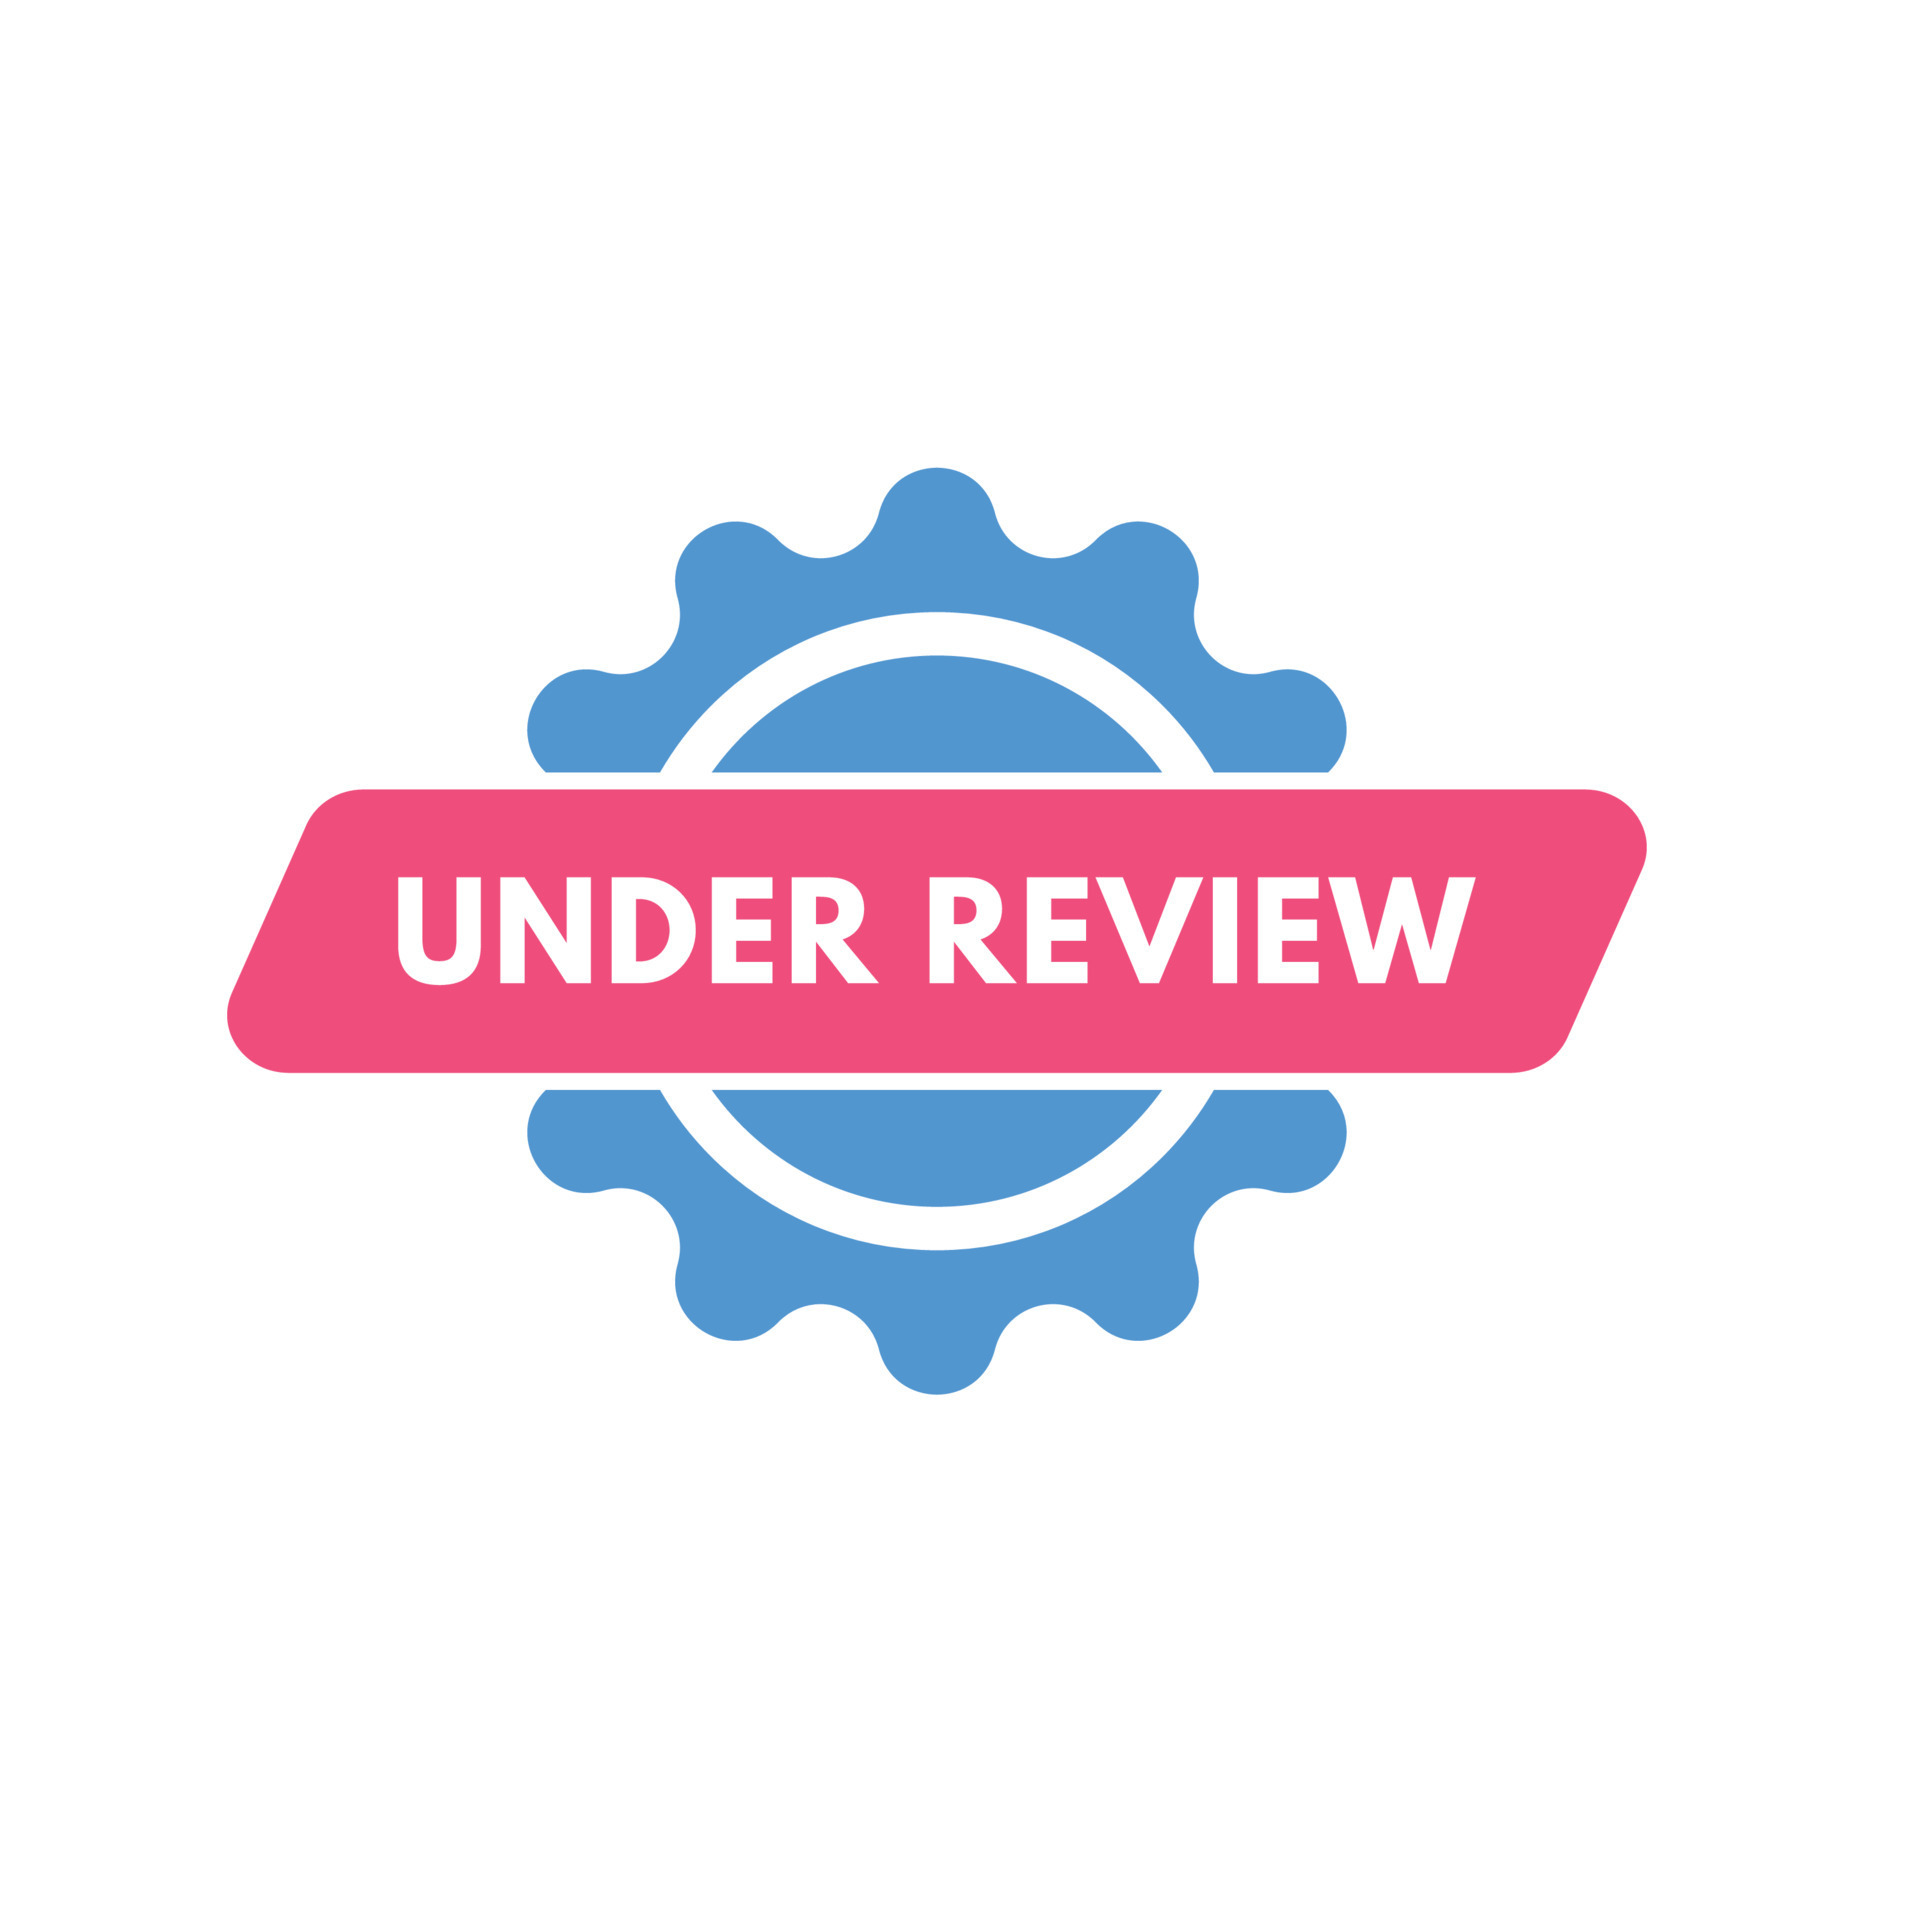 under review to awaiting reviewer assignment